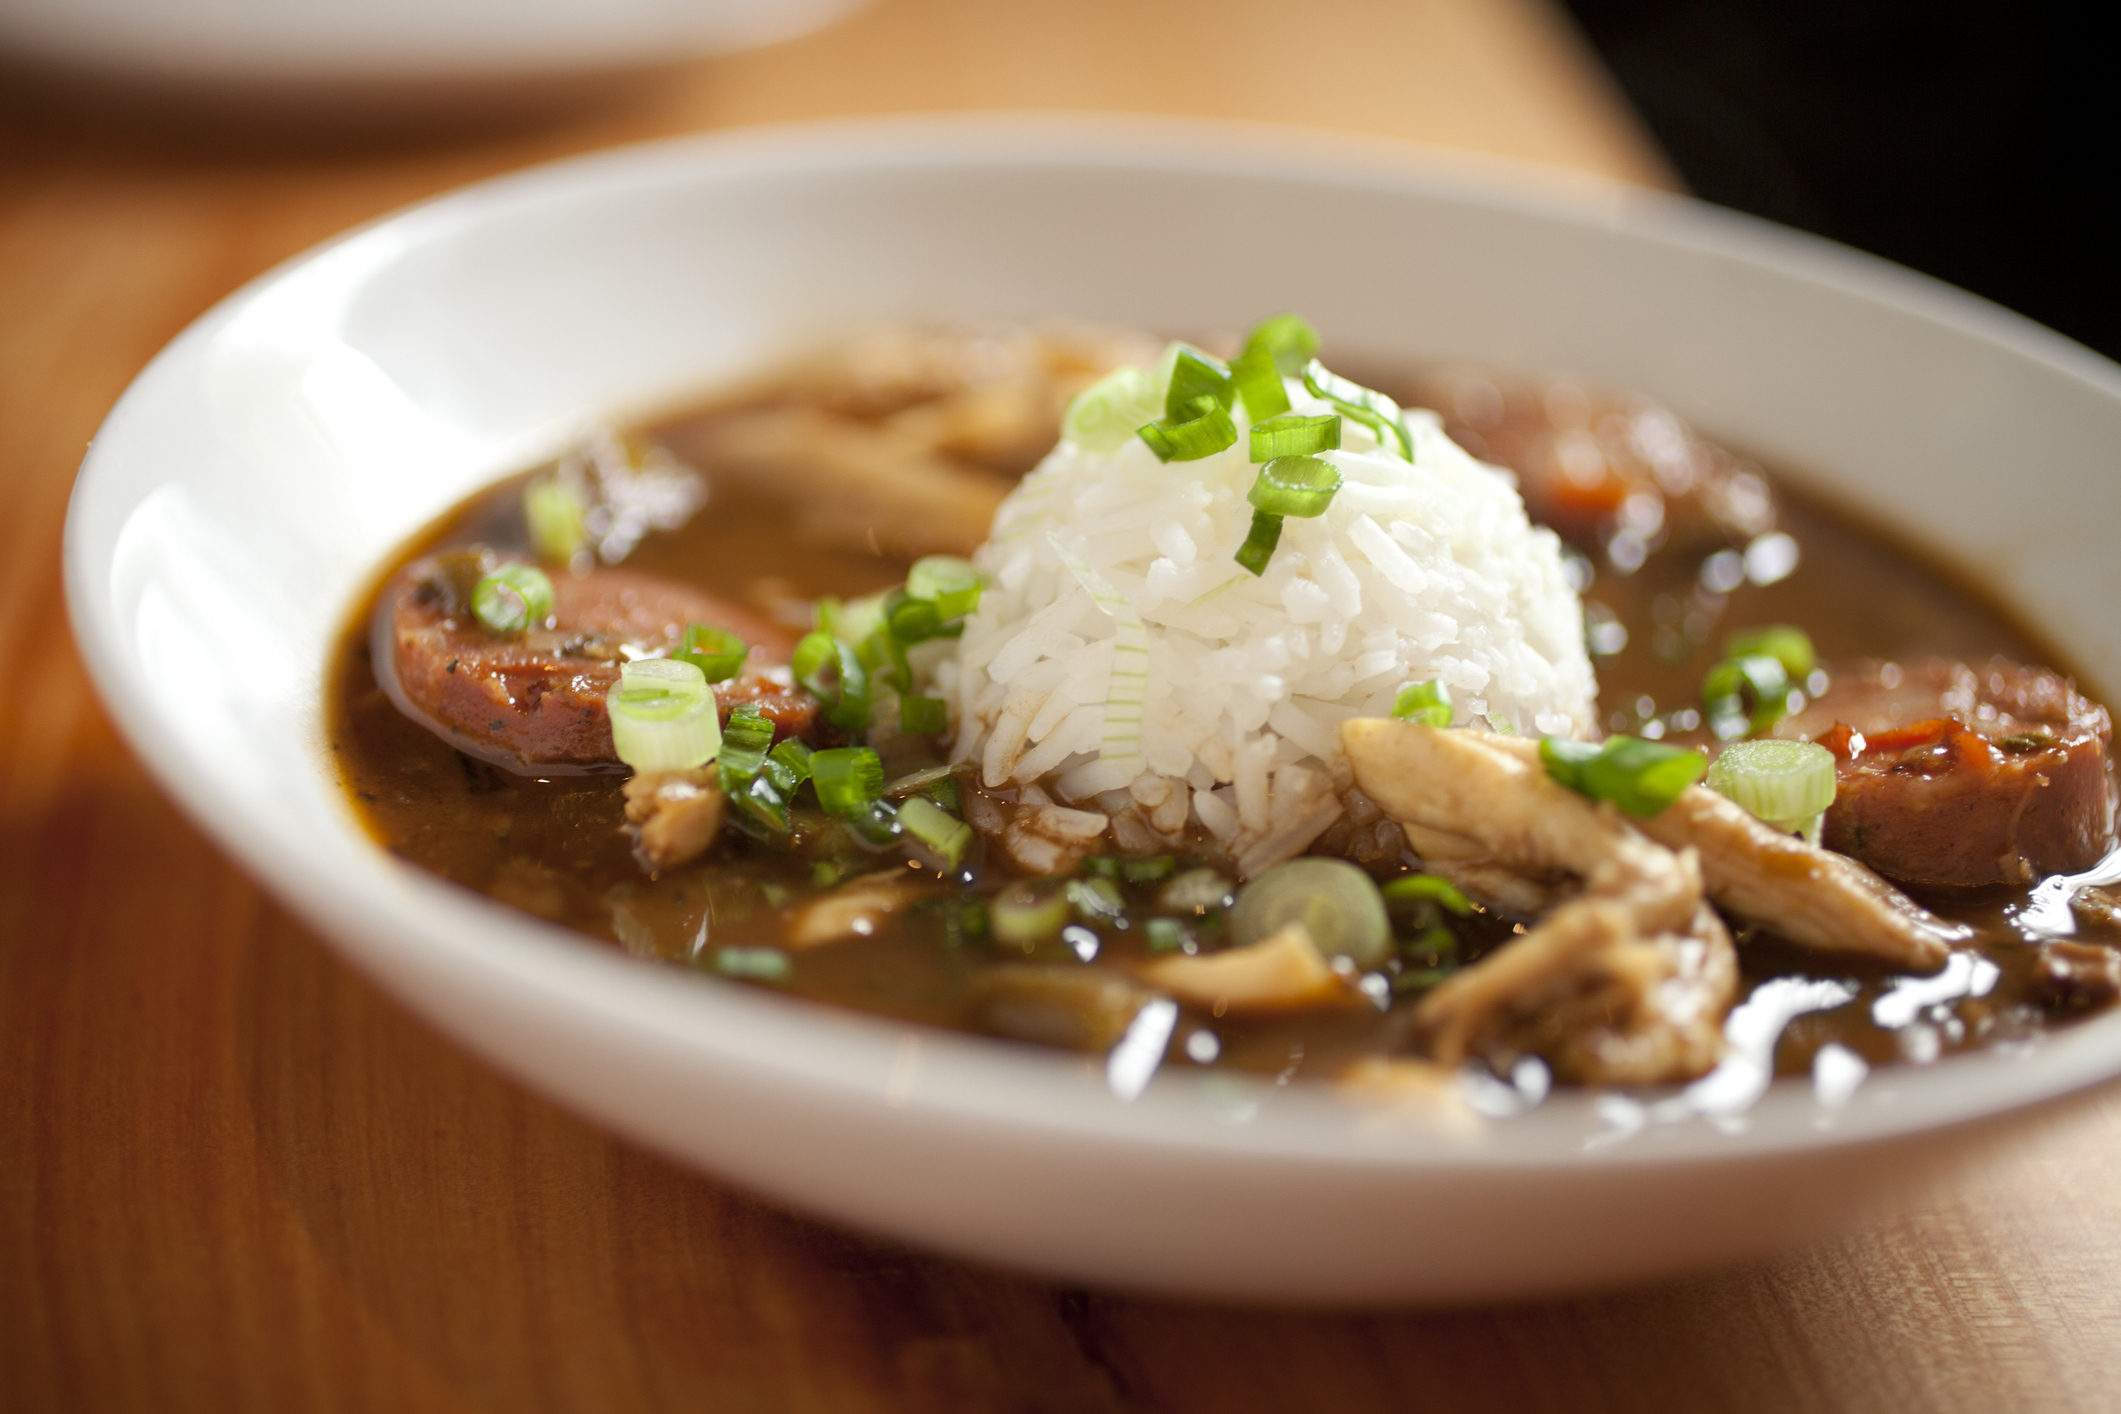 A bowl of gumbo with rice, sausage slices, and green onions